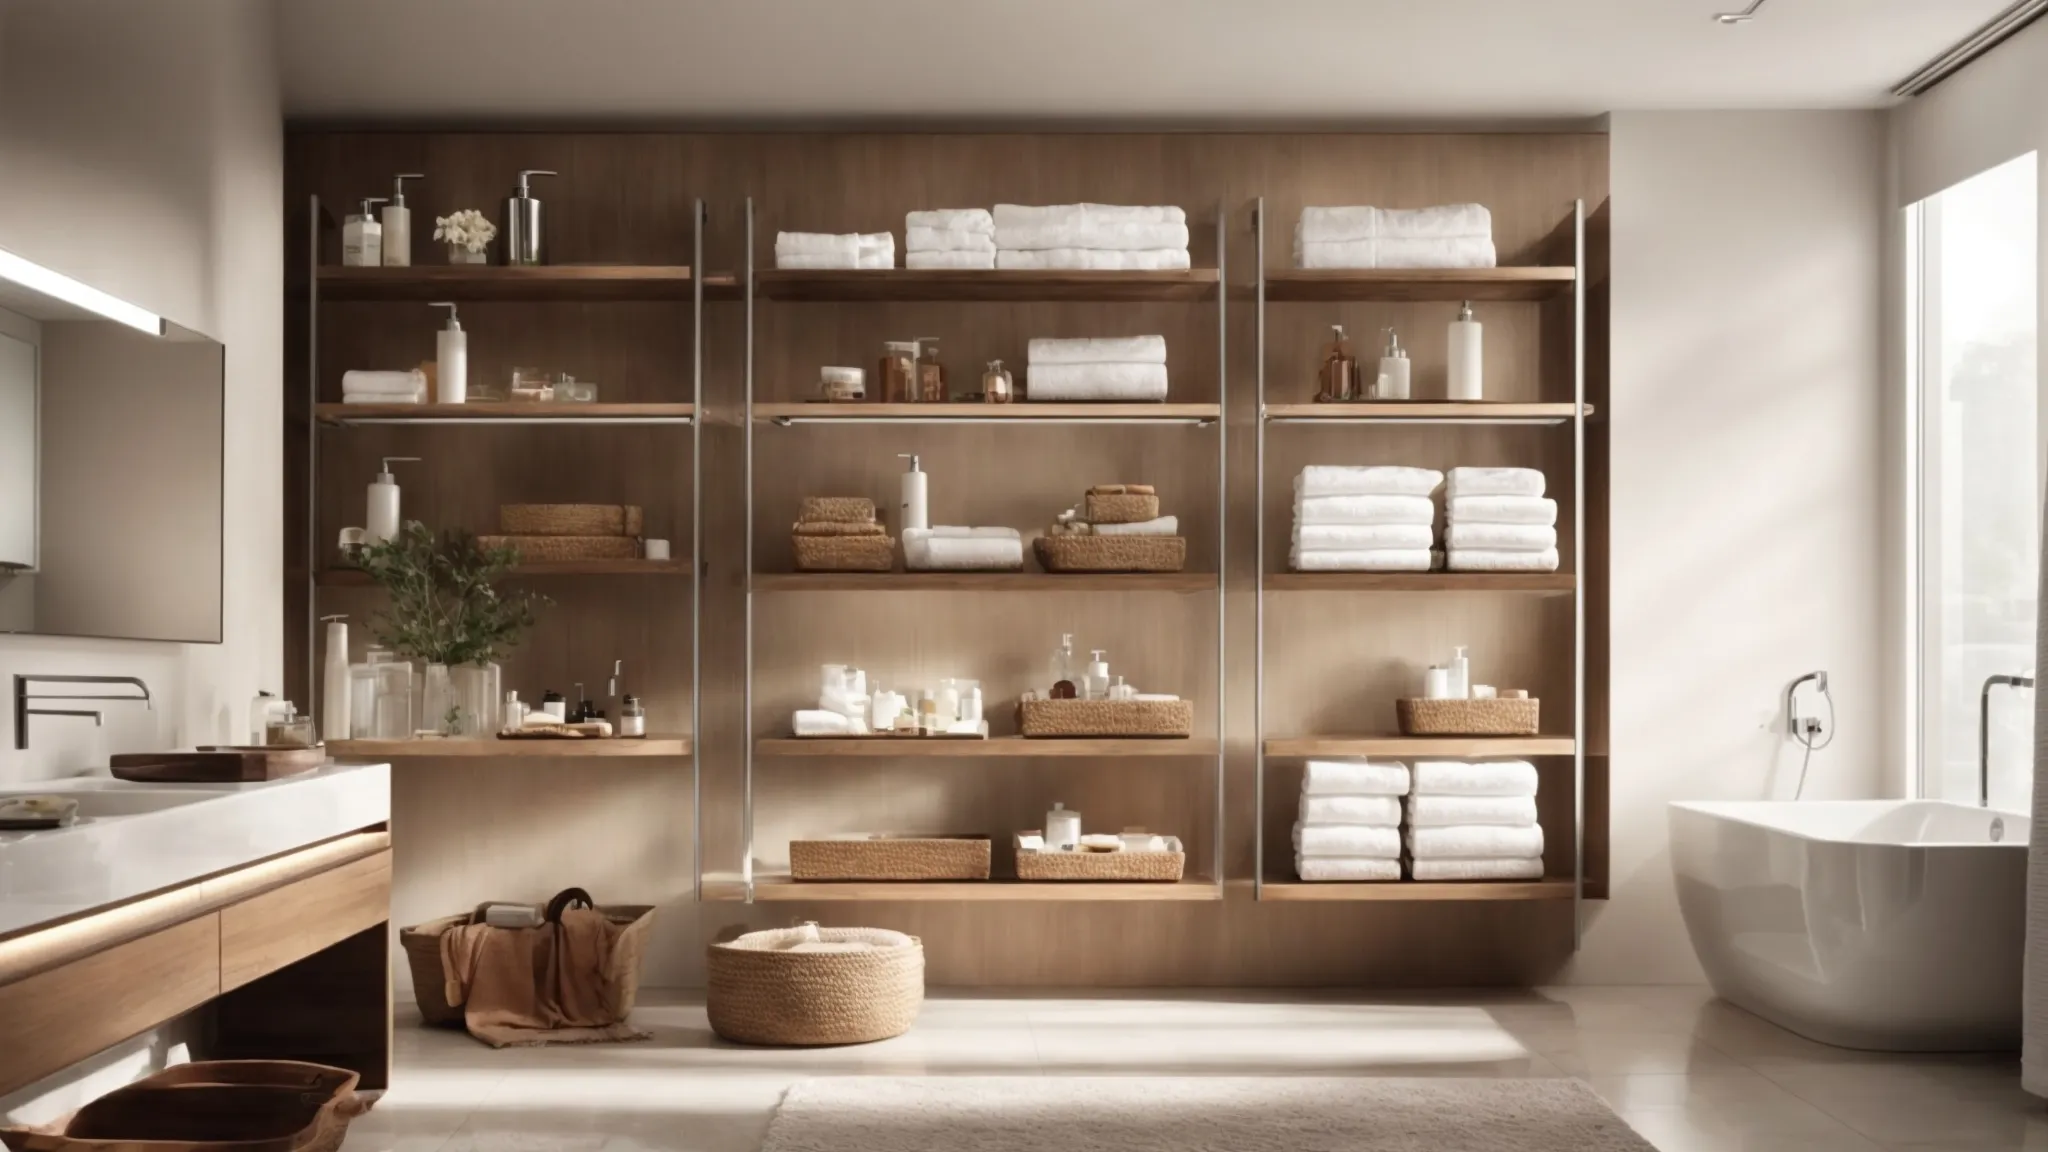 a bathroom with sleek open shelves displaying neatly organized towels and toiletries, enhancing both storage and aesthetics.